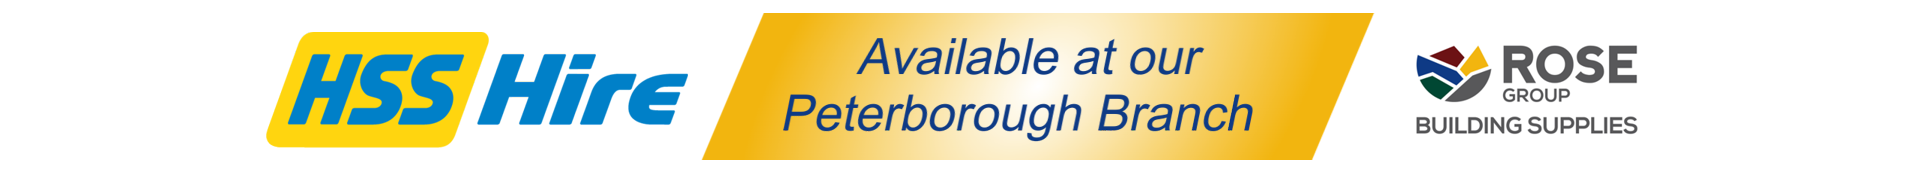 HSS Hire available in store at Rose Group Building Supplies Peterborough